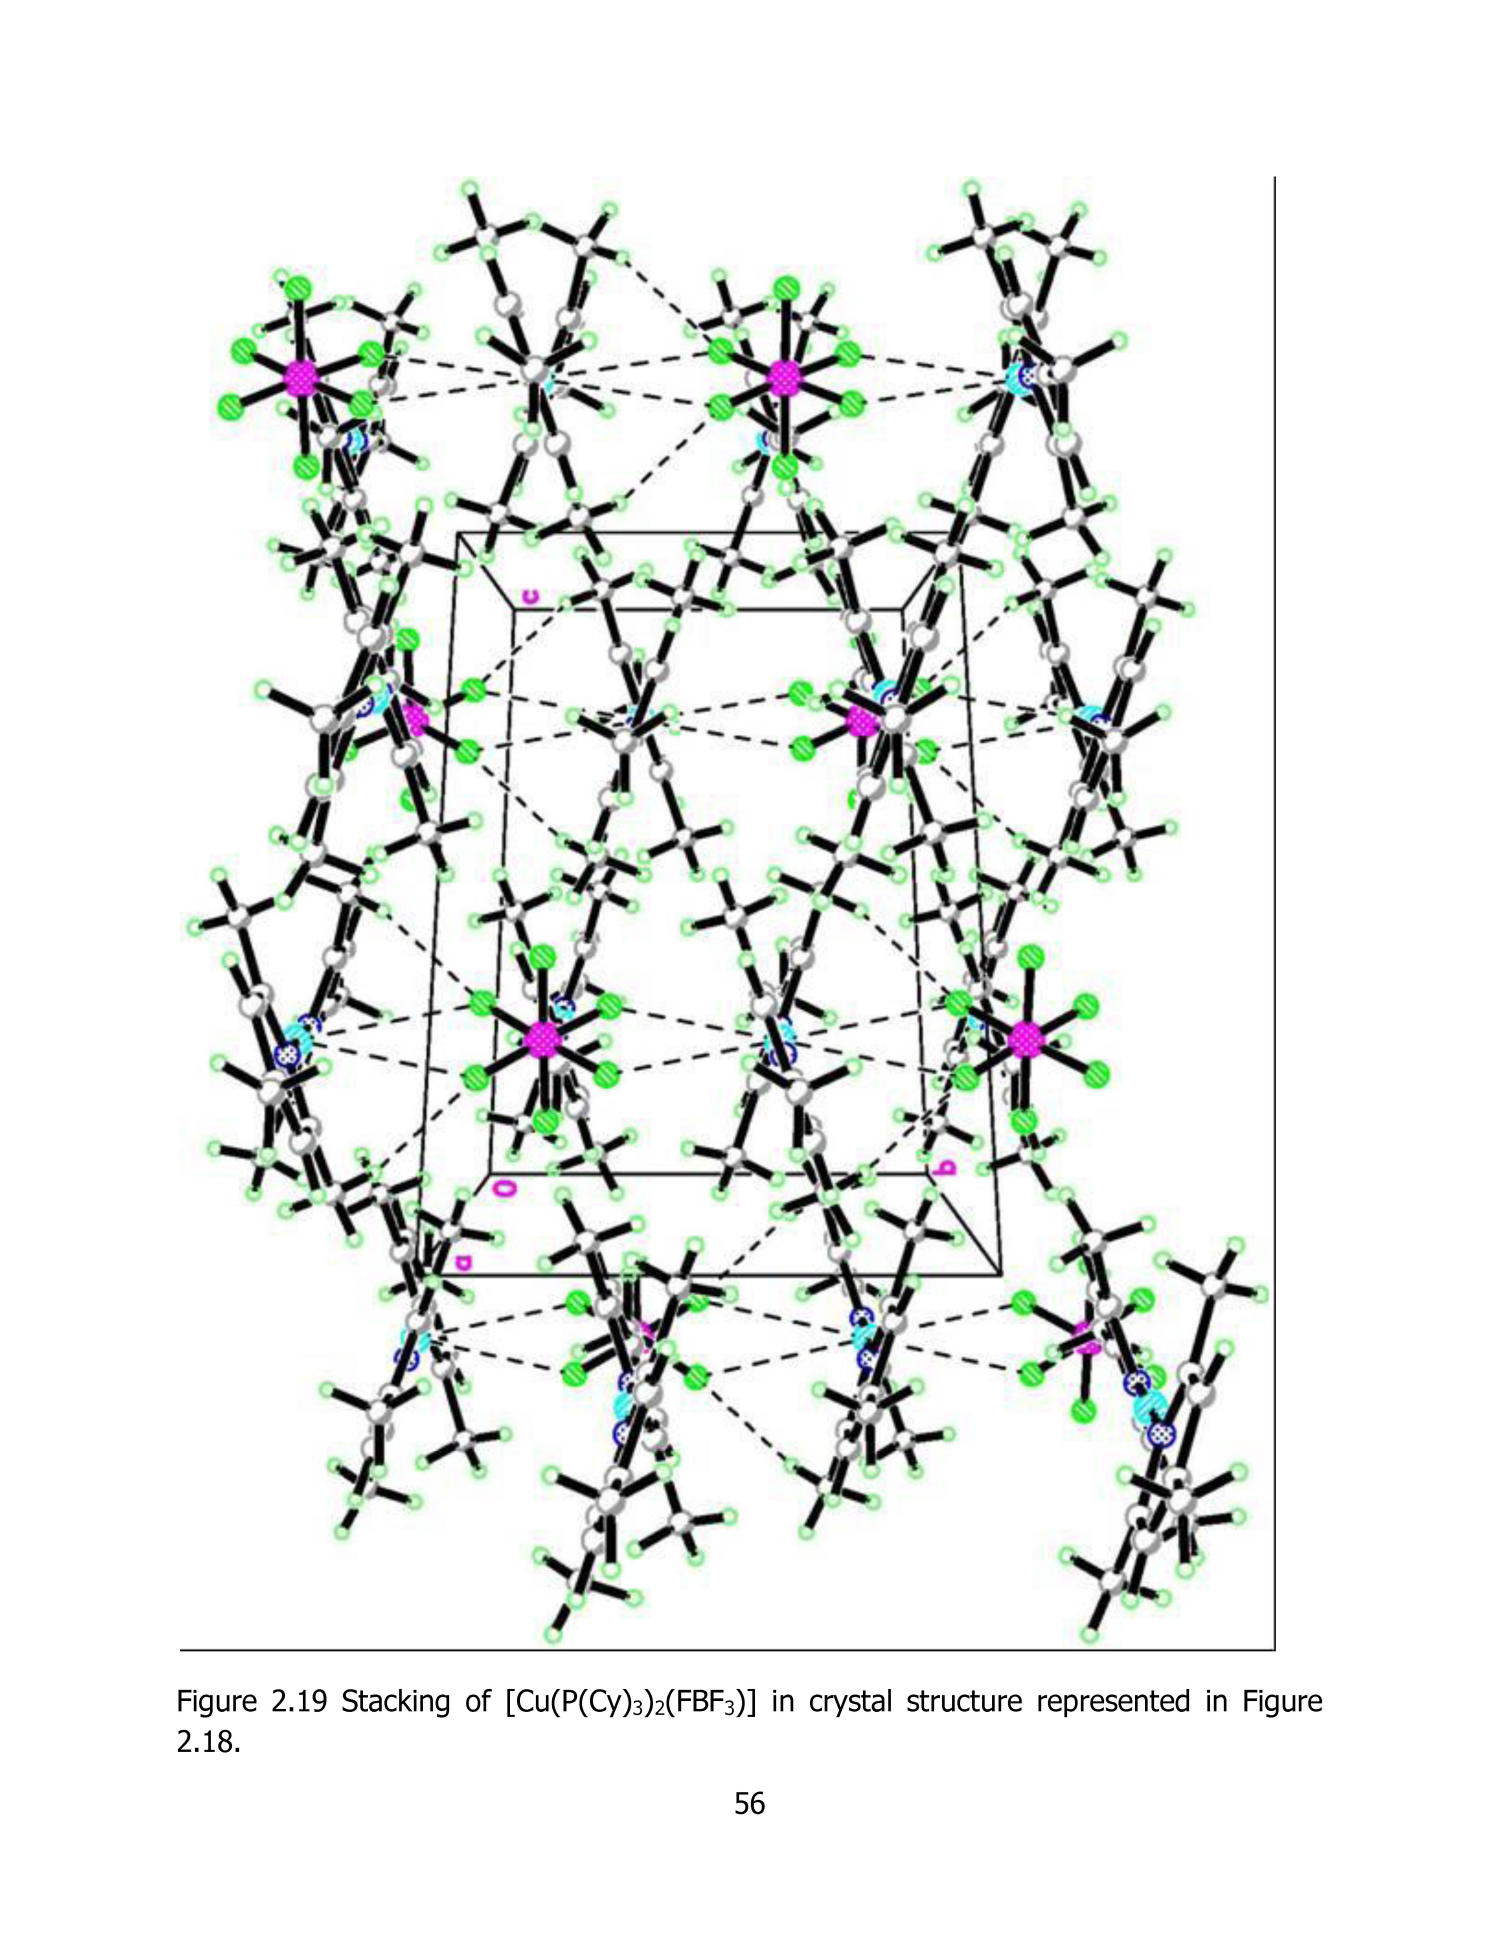 Photophysics and Photochemistry of Copper(I) Phosphine and Collidine Complexes: An Experimental/Theoretical Investigation
                                                
                                                    56
                                                